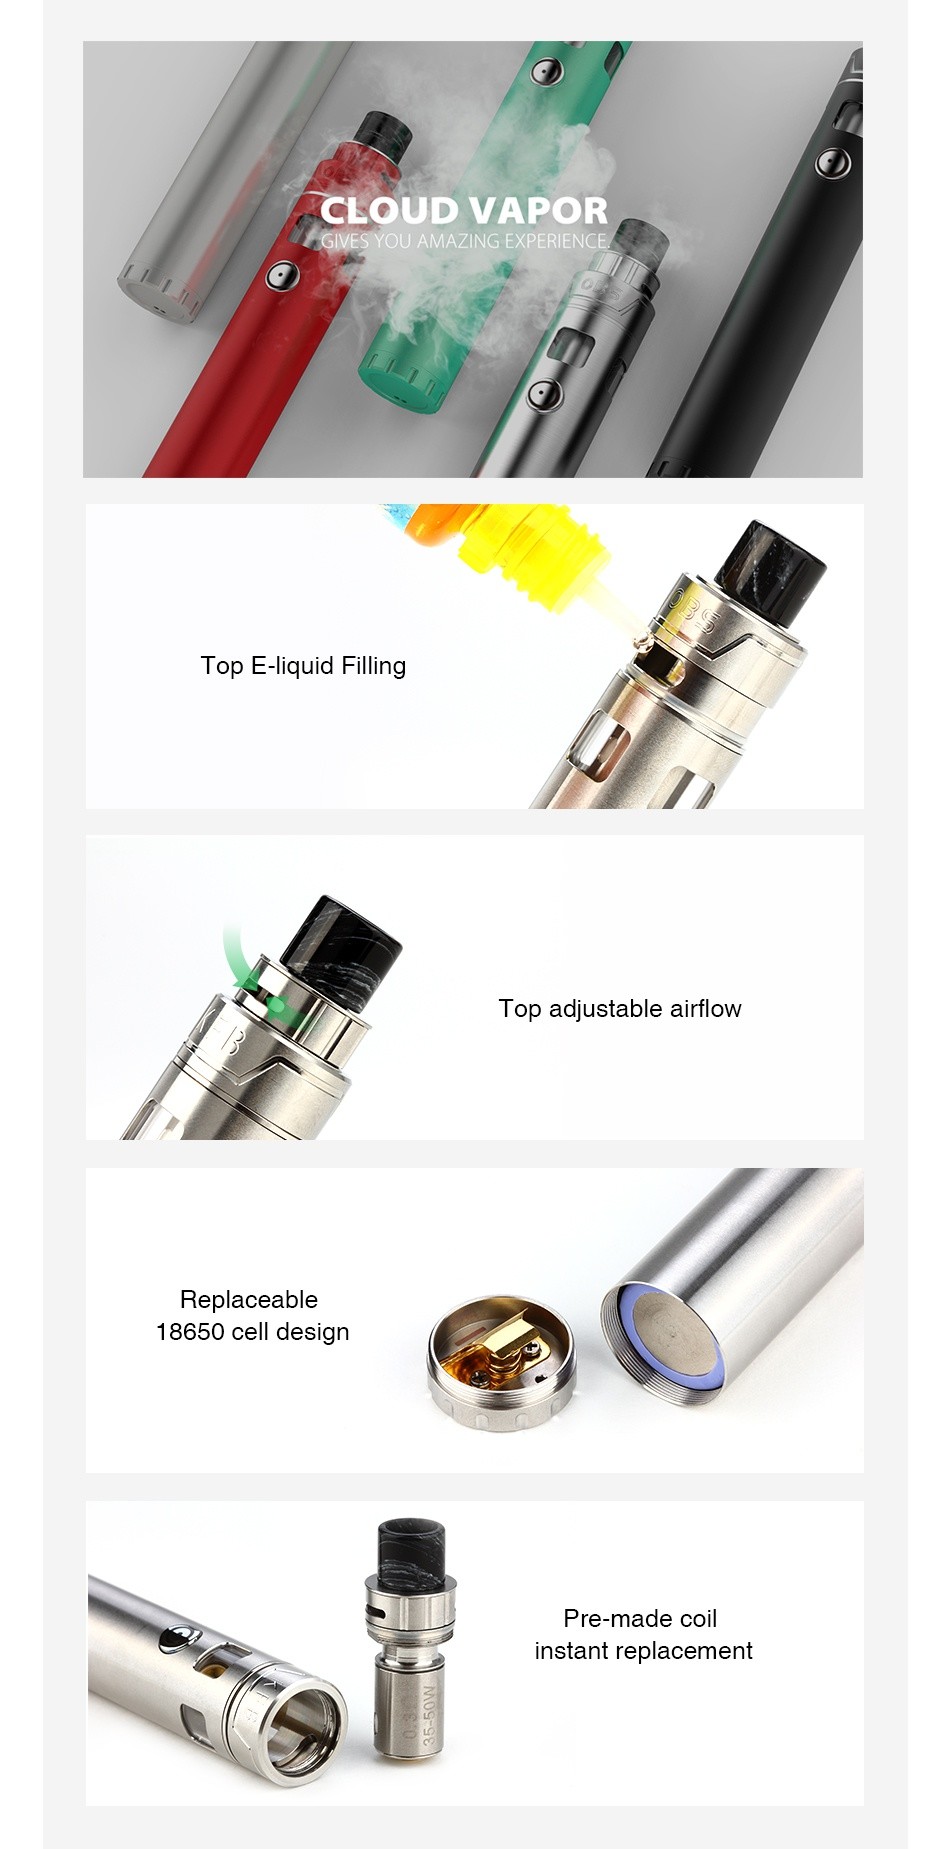 OBS KFB AIO Kit CLOUD VAPOR GIVES YOU AMAZING EXPERIENCE op E liquid Filling op adjustable airflow Replaceable 8650 cell design Pre made ant replacem